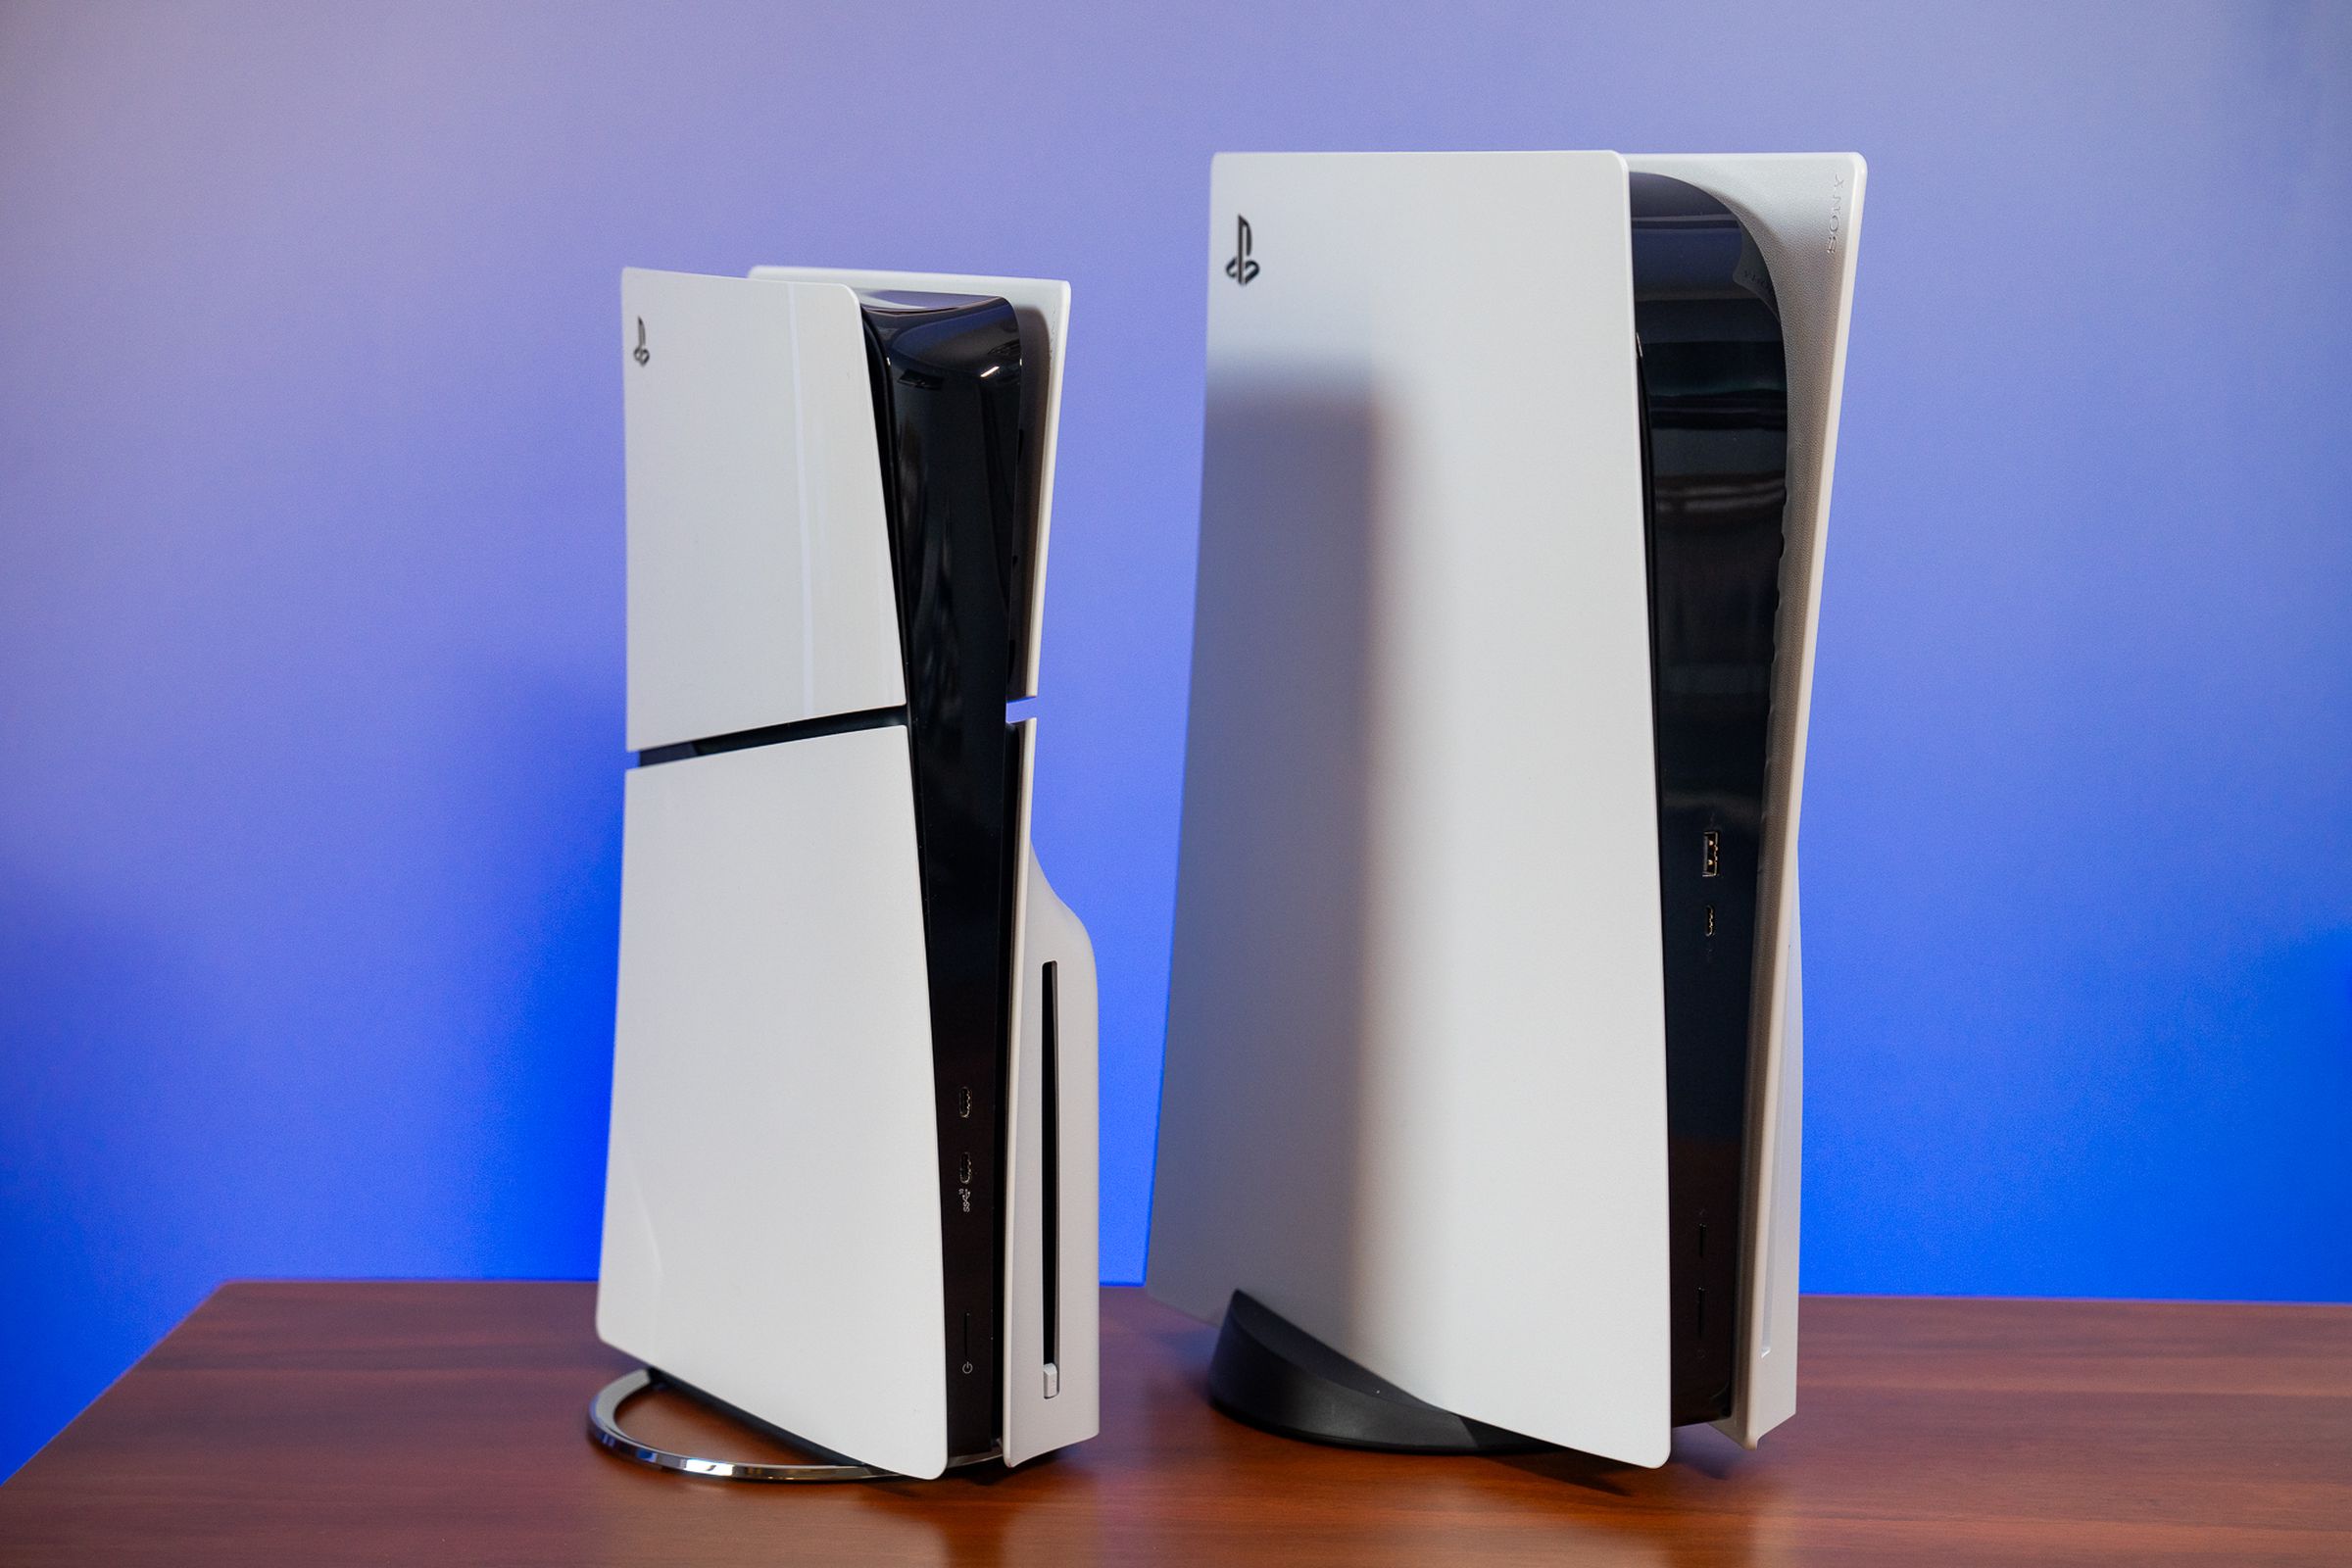 The new PlayStation 5 slim and standard PlayStation 5 standing vertically side by side on a table.